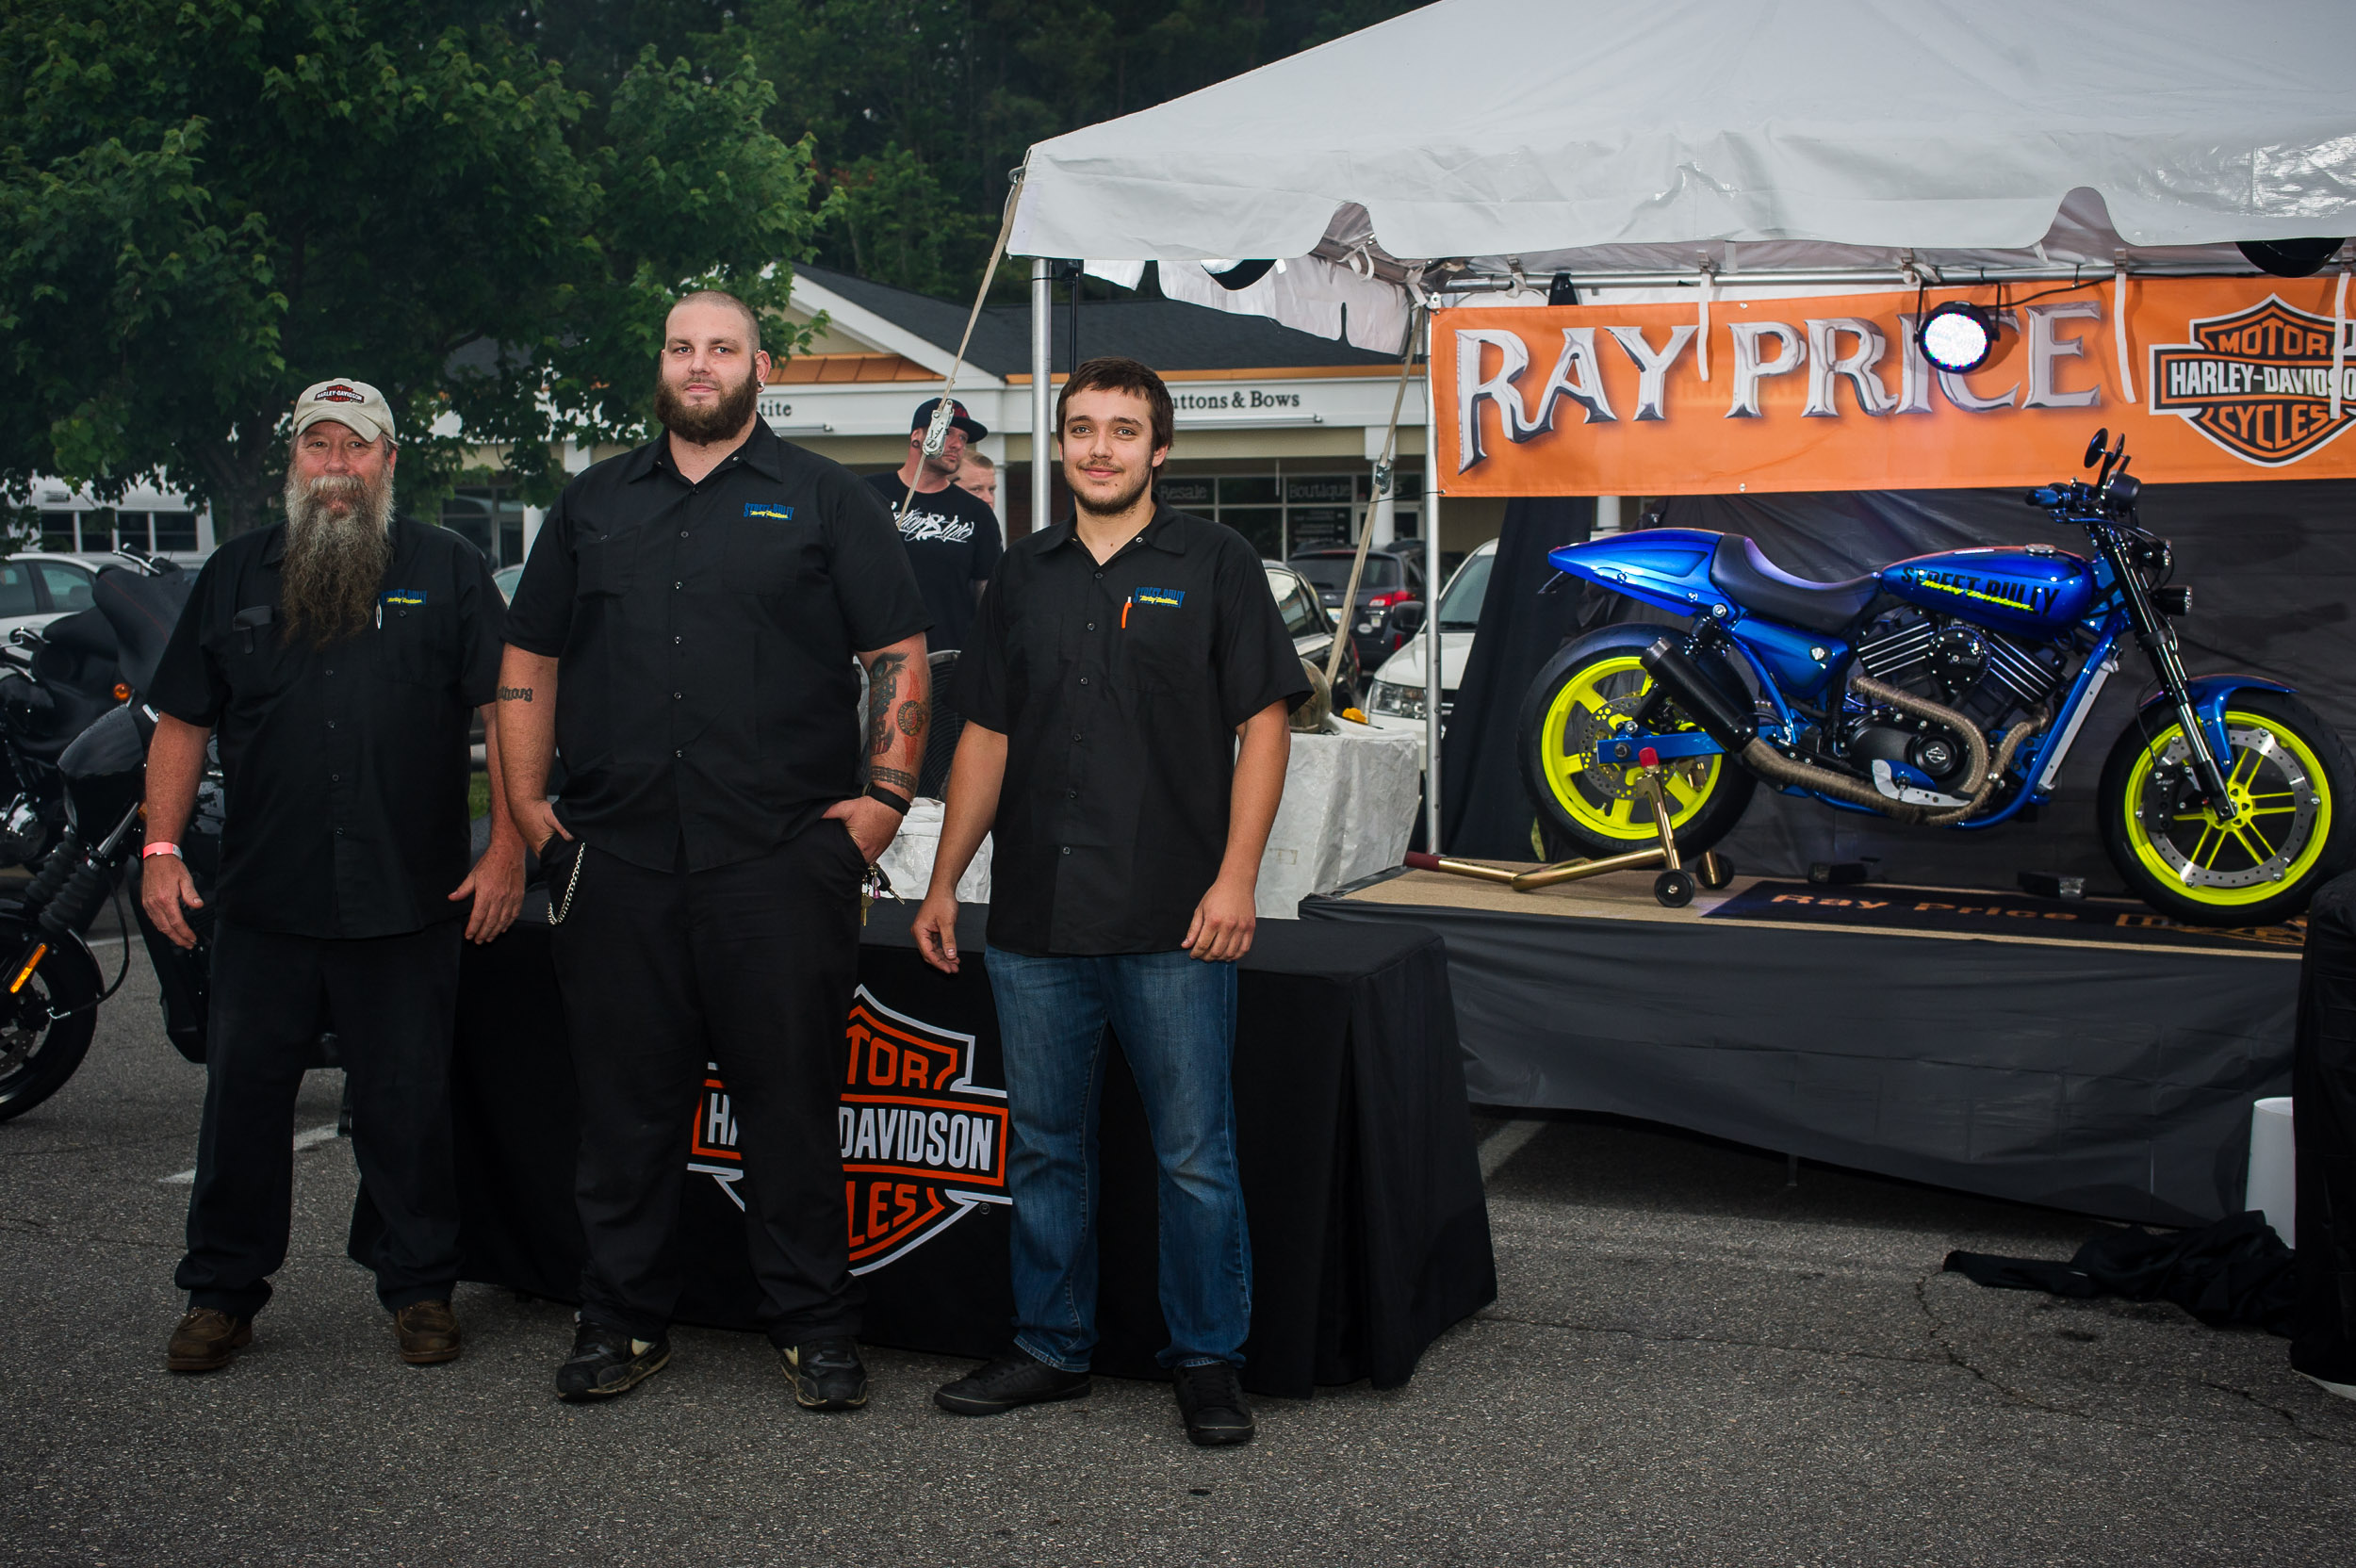 The Ray Price Harley-Davidson team reveals its "Street Bully" entry into Harley's Custom Kings competition.